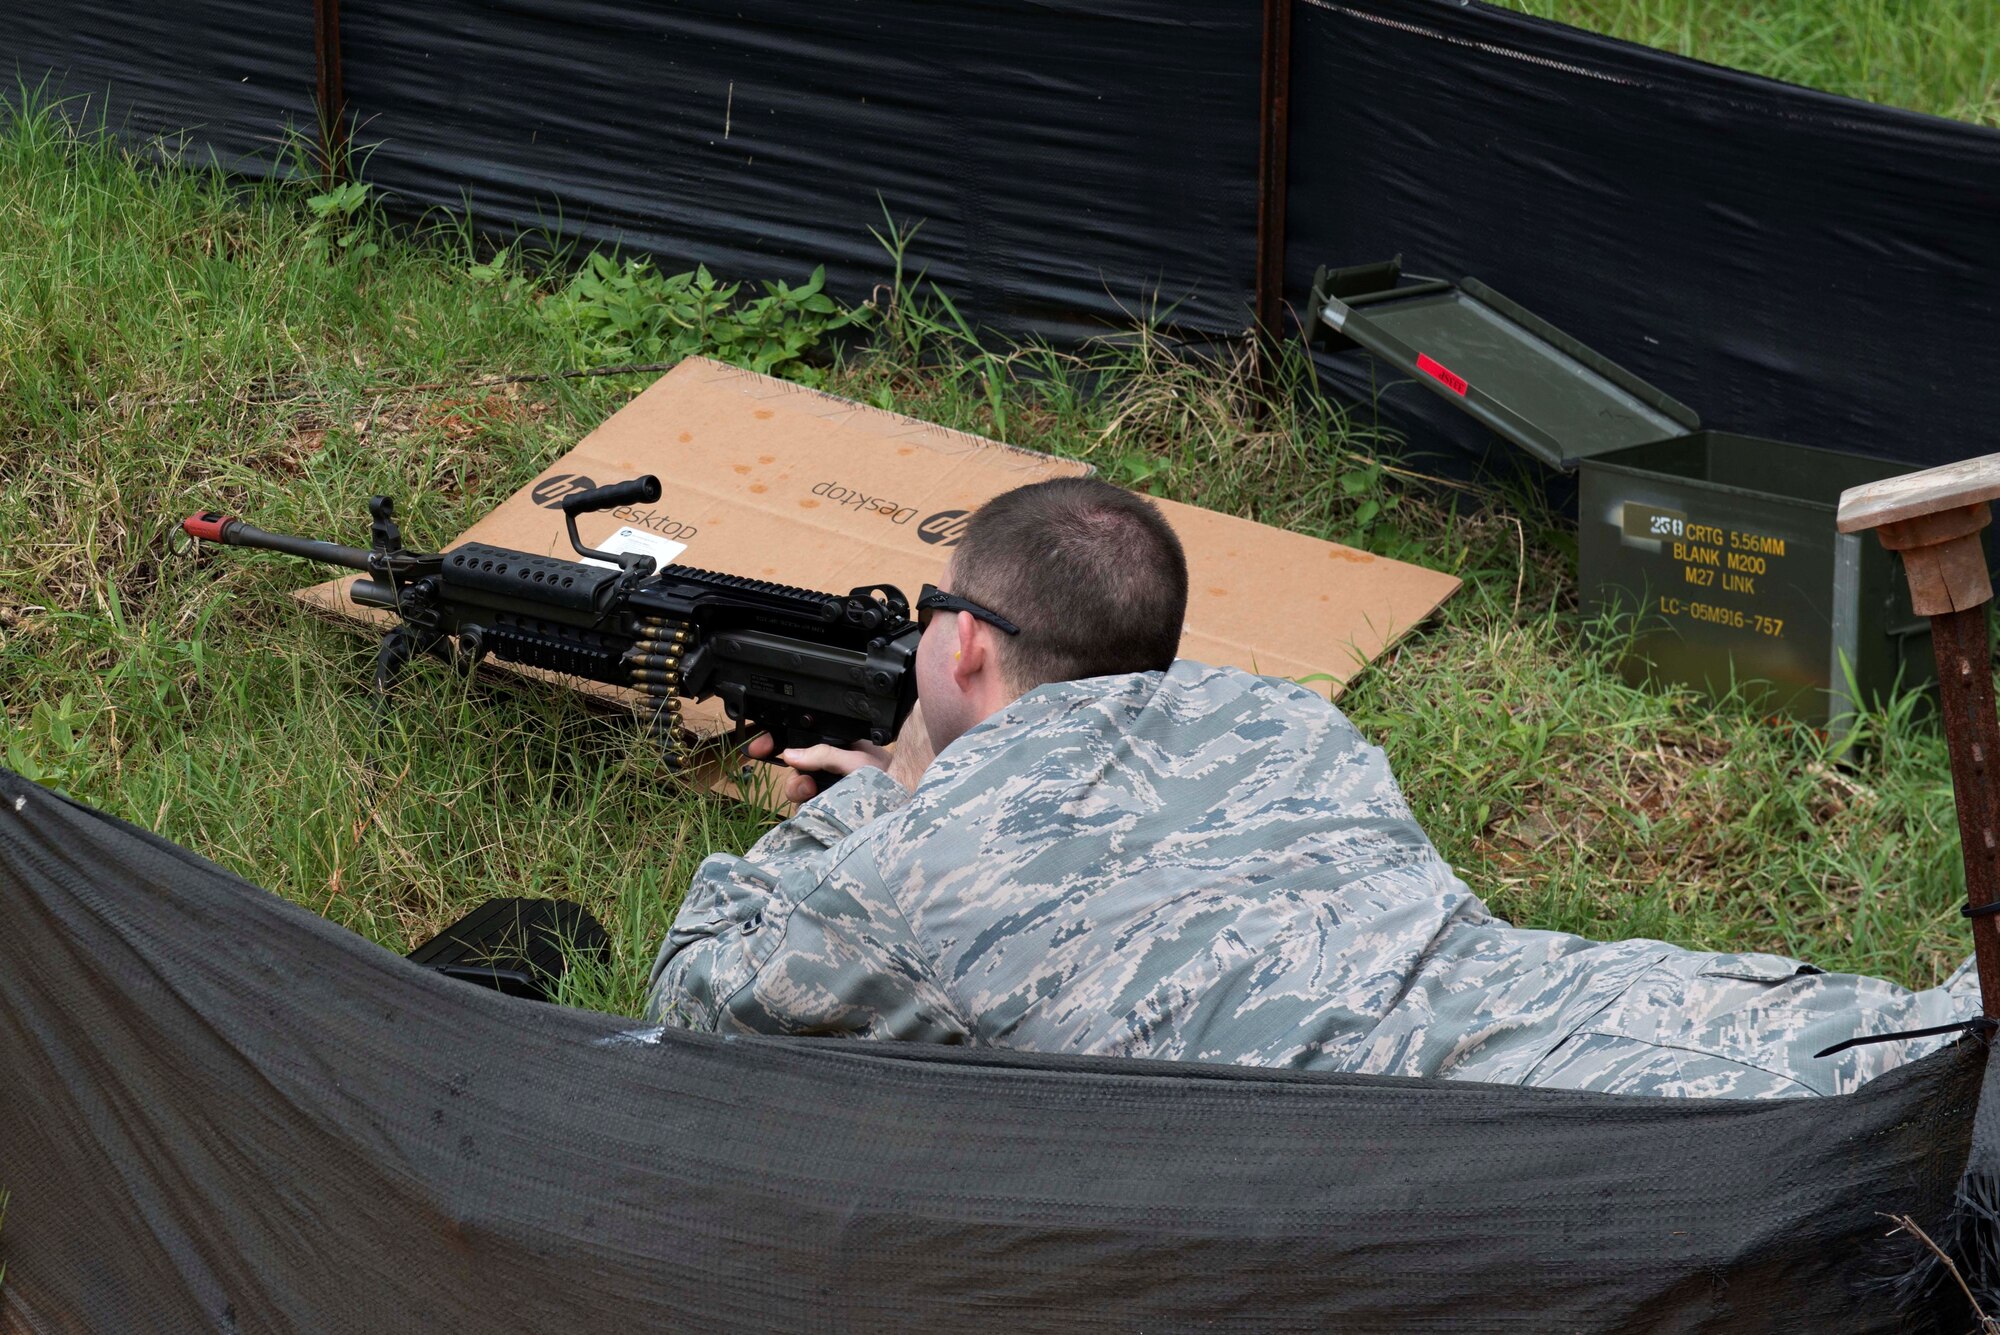 A U.S. Airman shoots blanks from an M-240 machine gun during an exercise put on by the 20th Medical Group (MDG) at Shaw Air Force Base, S.C., Aug. 2, 2018.